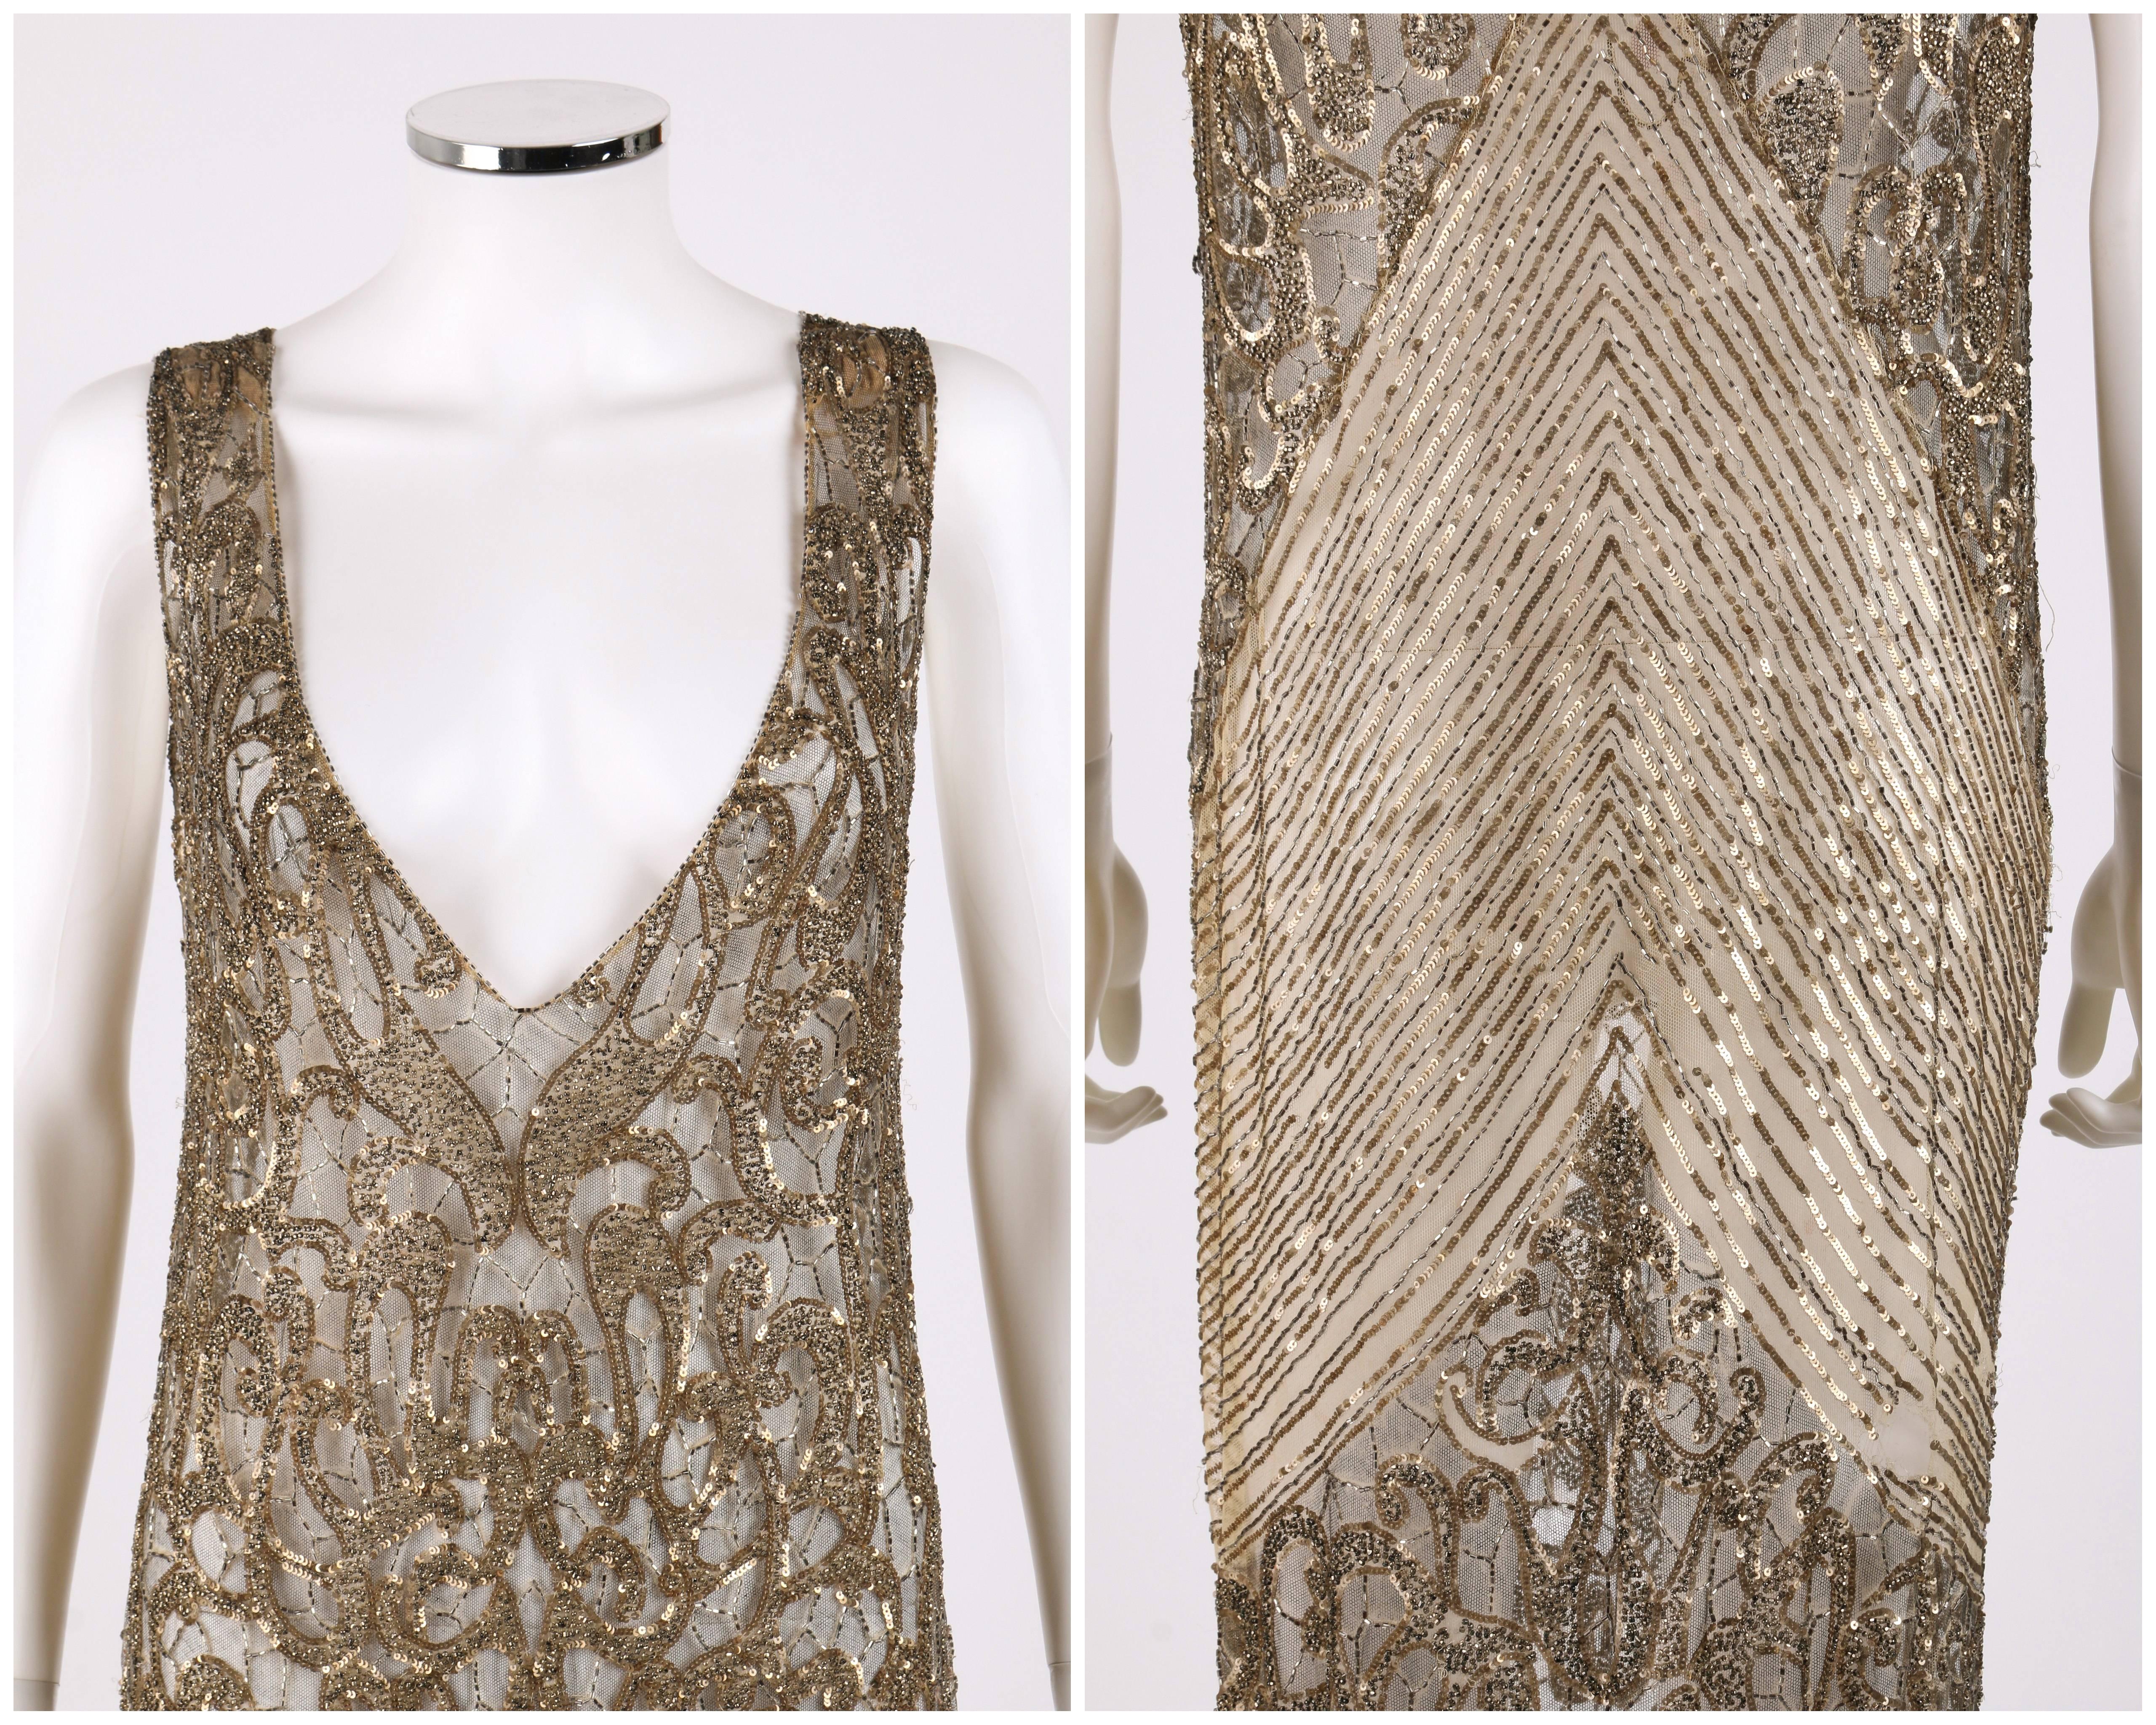 Brown Couture c.1920's Gold Sequin Beaded Net Plunging Flapper Art Deco Evening Dress